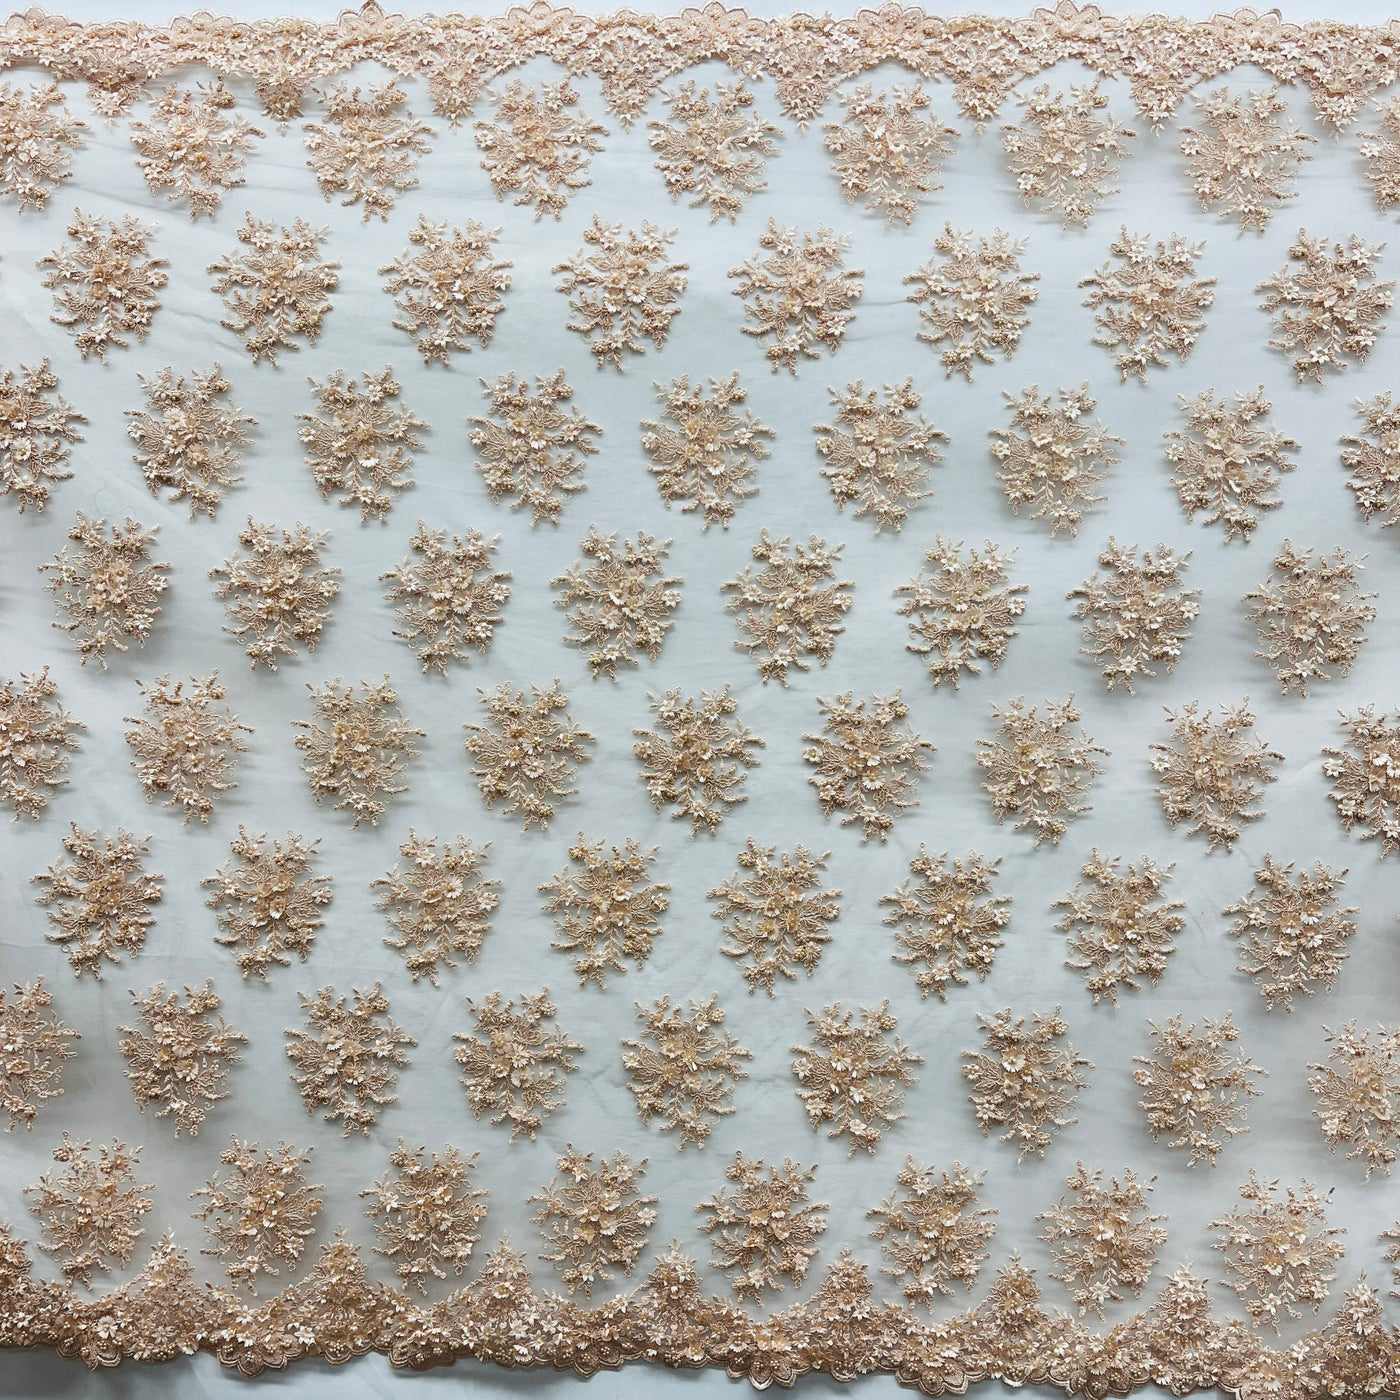 Beaded 3D Floral Lace Fabric Embroidered on 100% Polyester Net Mesh | Lace USA - GD-361